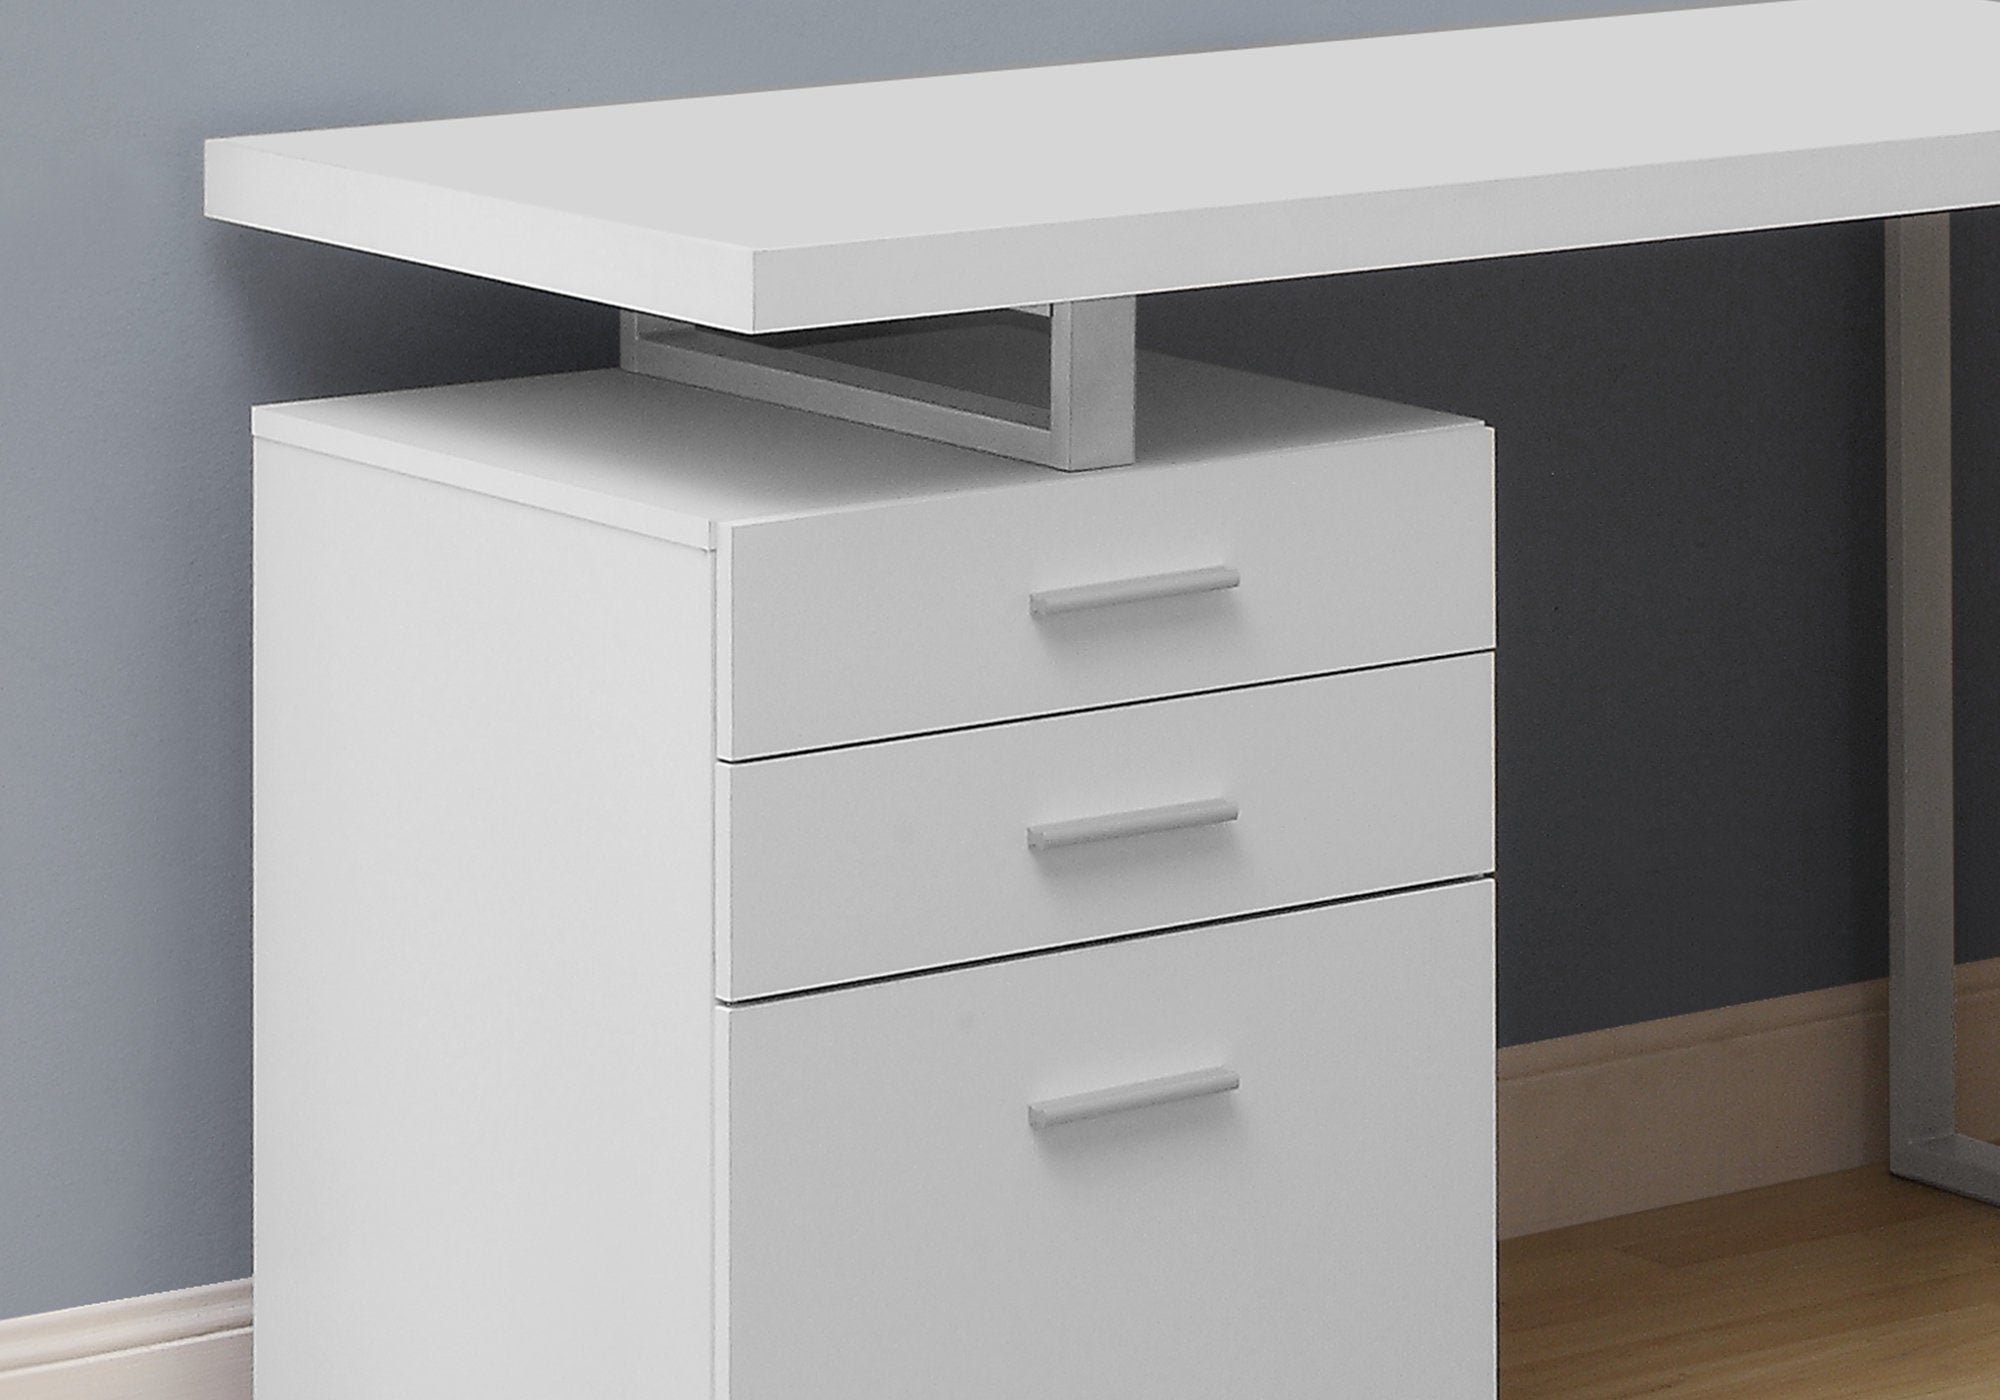 MN-747027    Computer Desk, Home Office, Laptop, Left, Right Set-Up, Storage Drawers, 48"L, Metal, Laminate, White, White, Contemporary, Modern